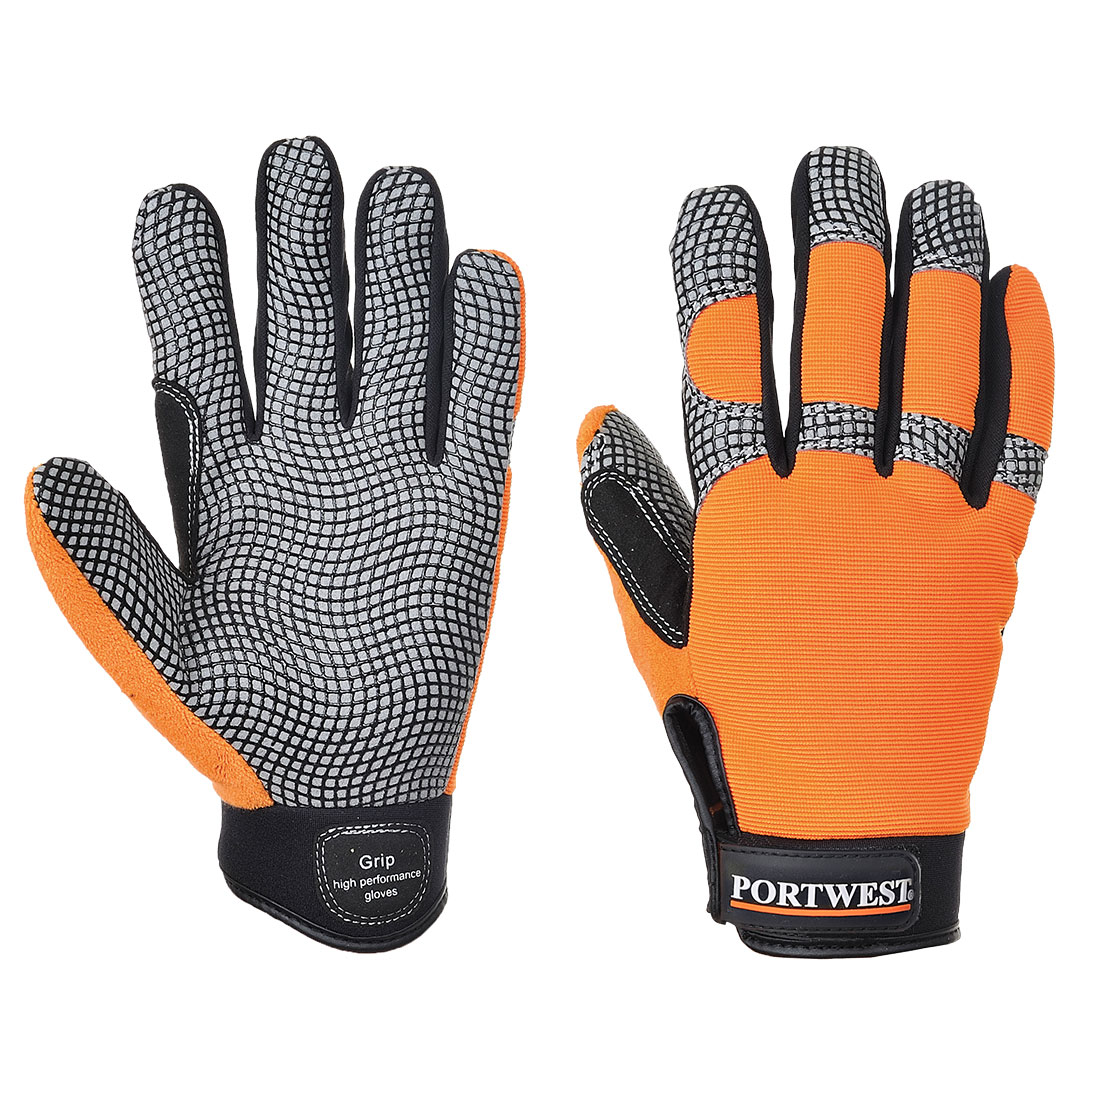 Comfort Grip - High Performance Glove Re-usable Gloves A735